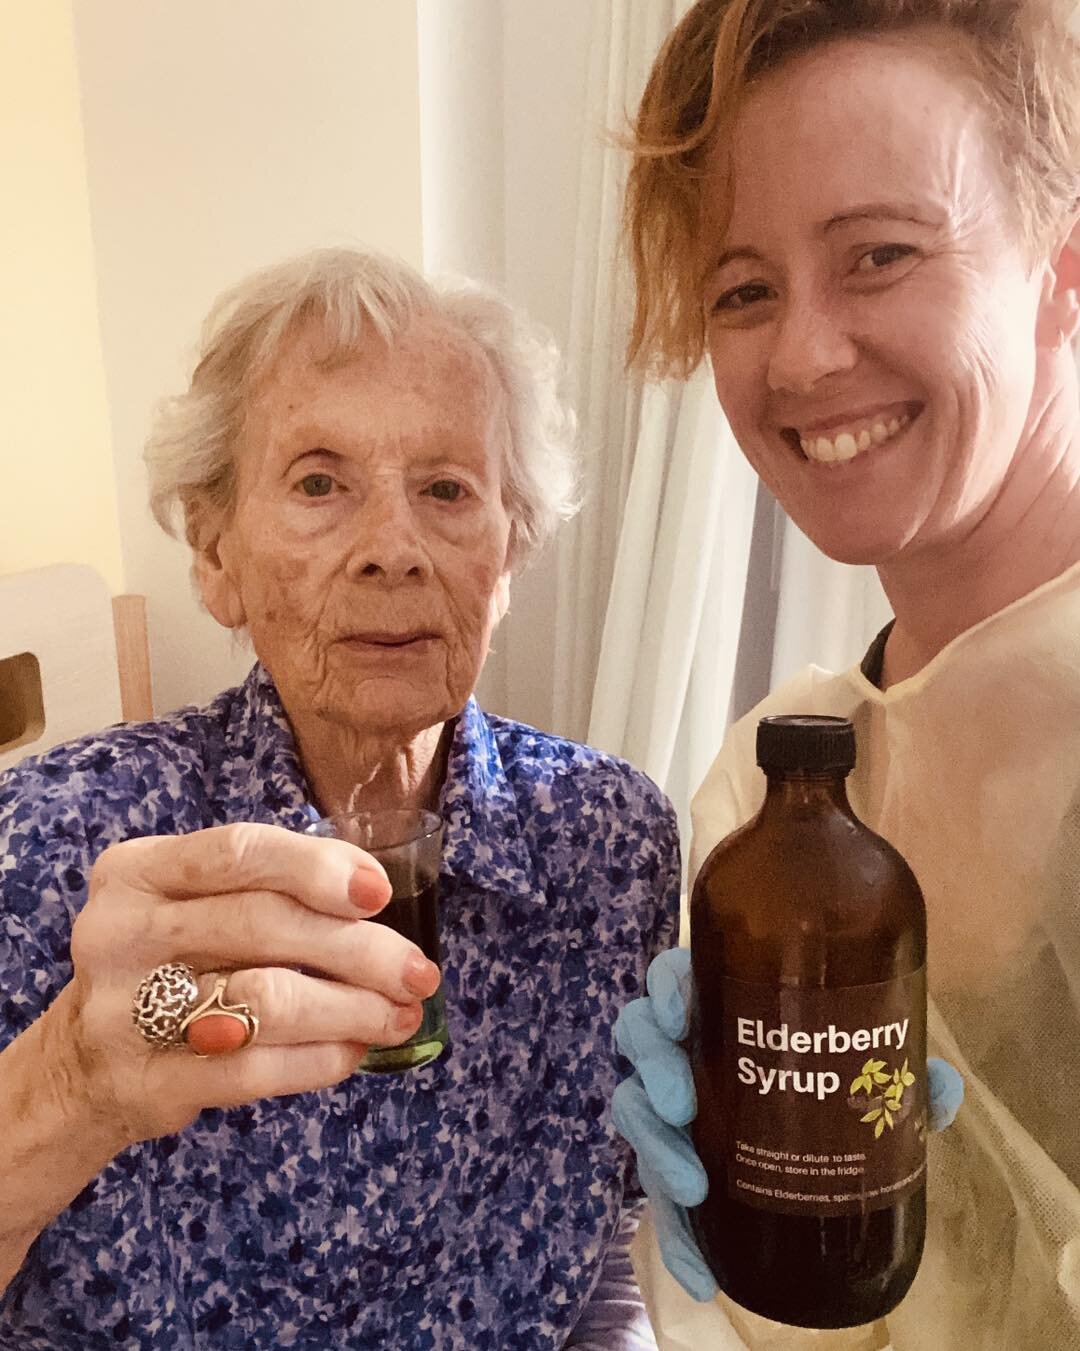 Prost!! 🍻 

She may not have remembered my visit yesterday but one look at the cold bag over my shoulder and she said, &ldquo;oh you bought that lovely Elderberry Syrup you made! Let&rsquo;s have some more. I&rsquo;m feeling so good!&rdquo; 😆❤️

Sa